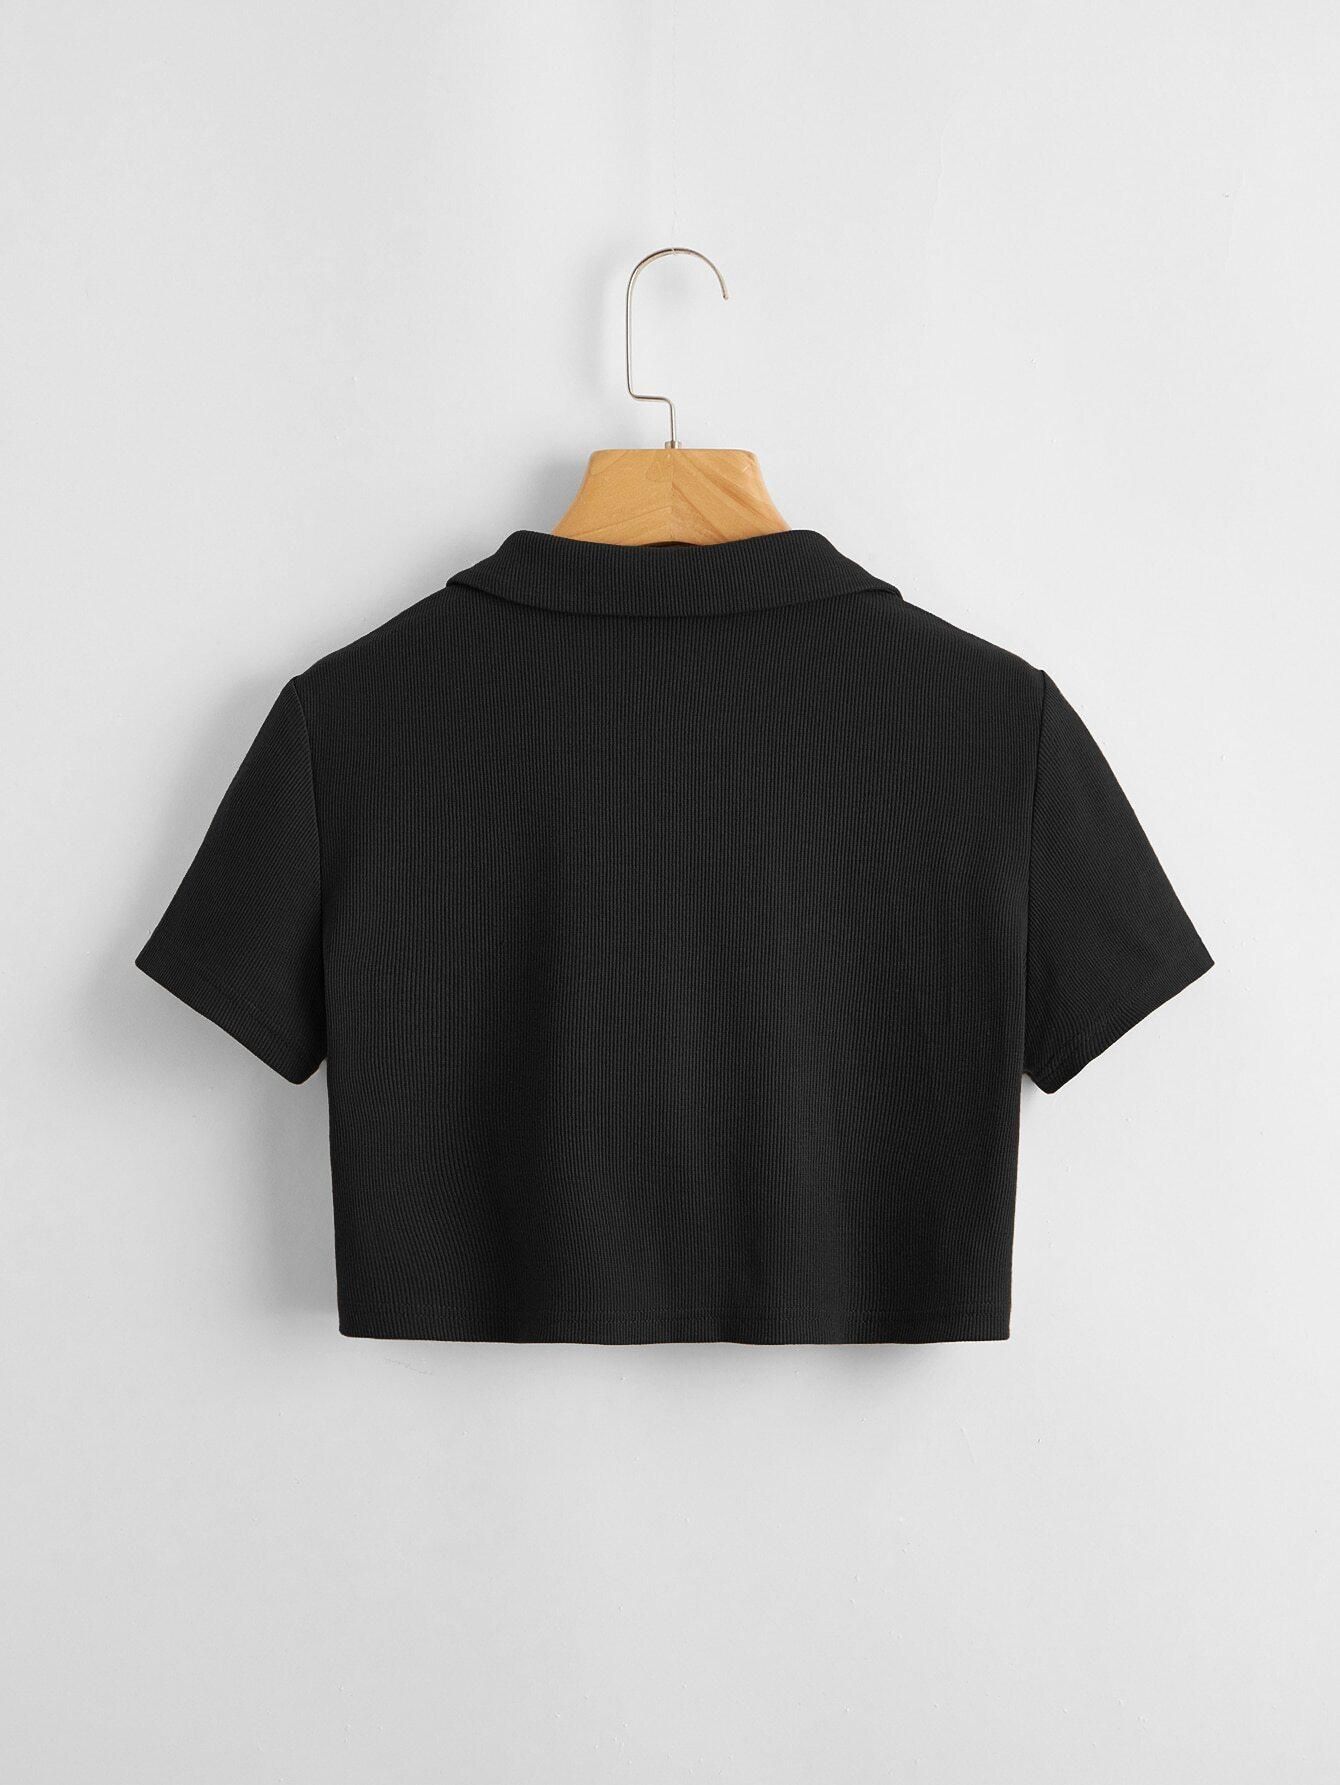 AAHWAN Solid Shirt Style Crop Top For Women's